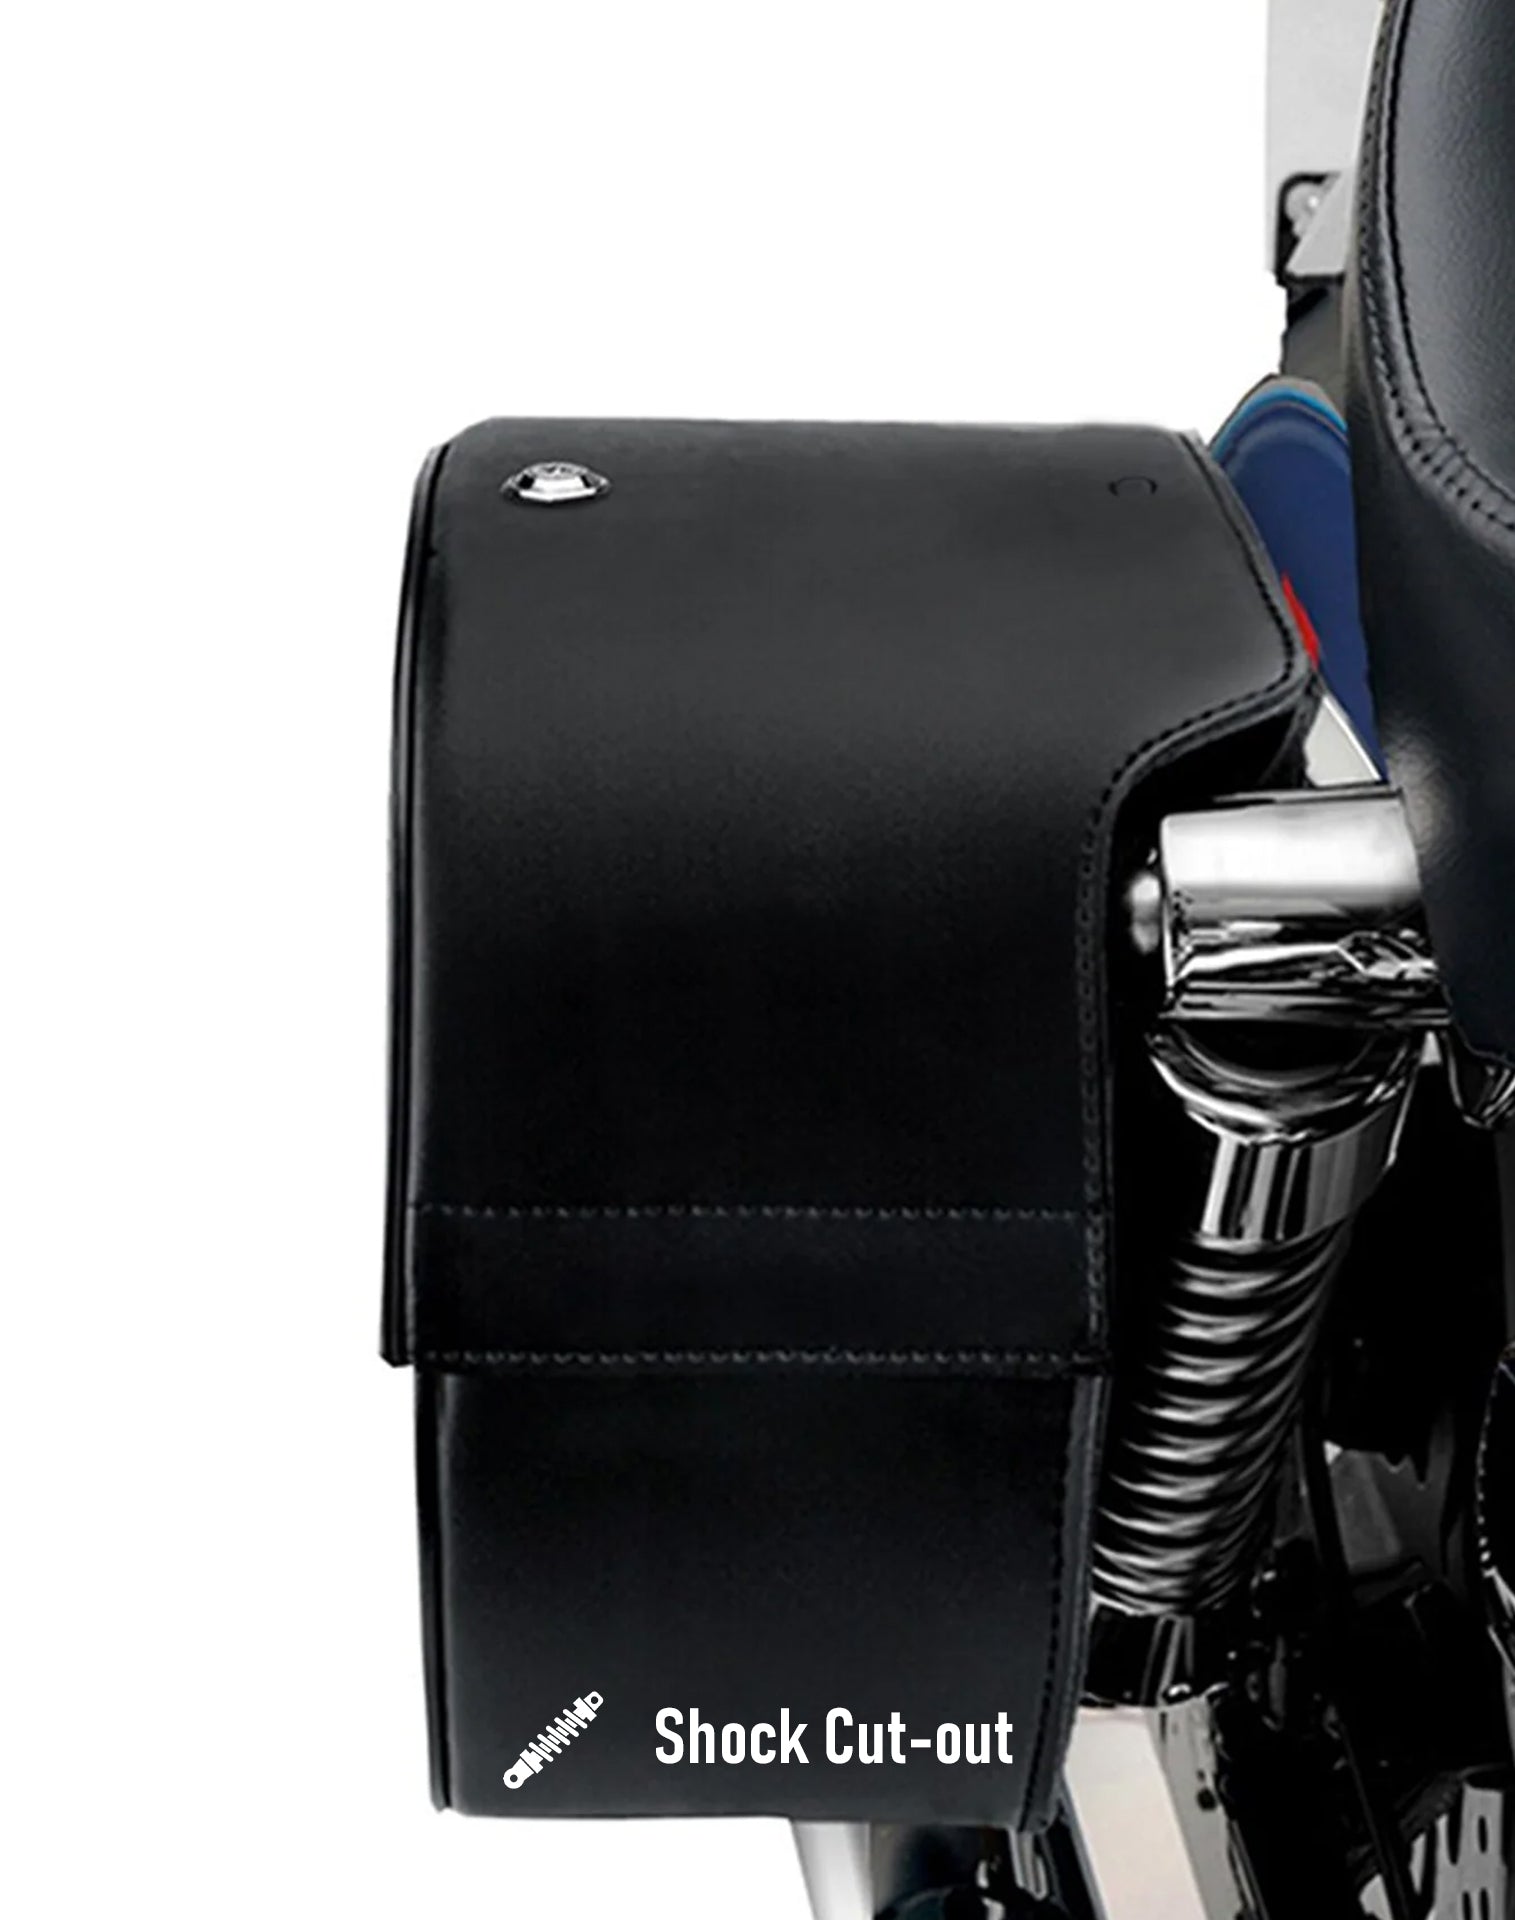 Viking Essential Side Pocket Large Shock Cutout Leather Motorcycle Saddlebags For Harley Sportster 1200 Nightster Xl1200N Hard Shell Construction